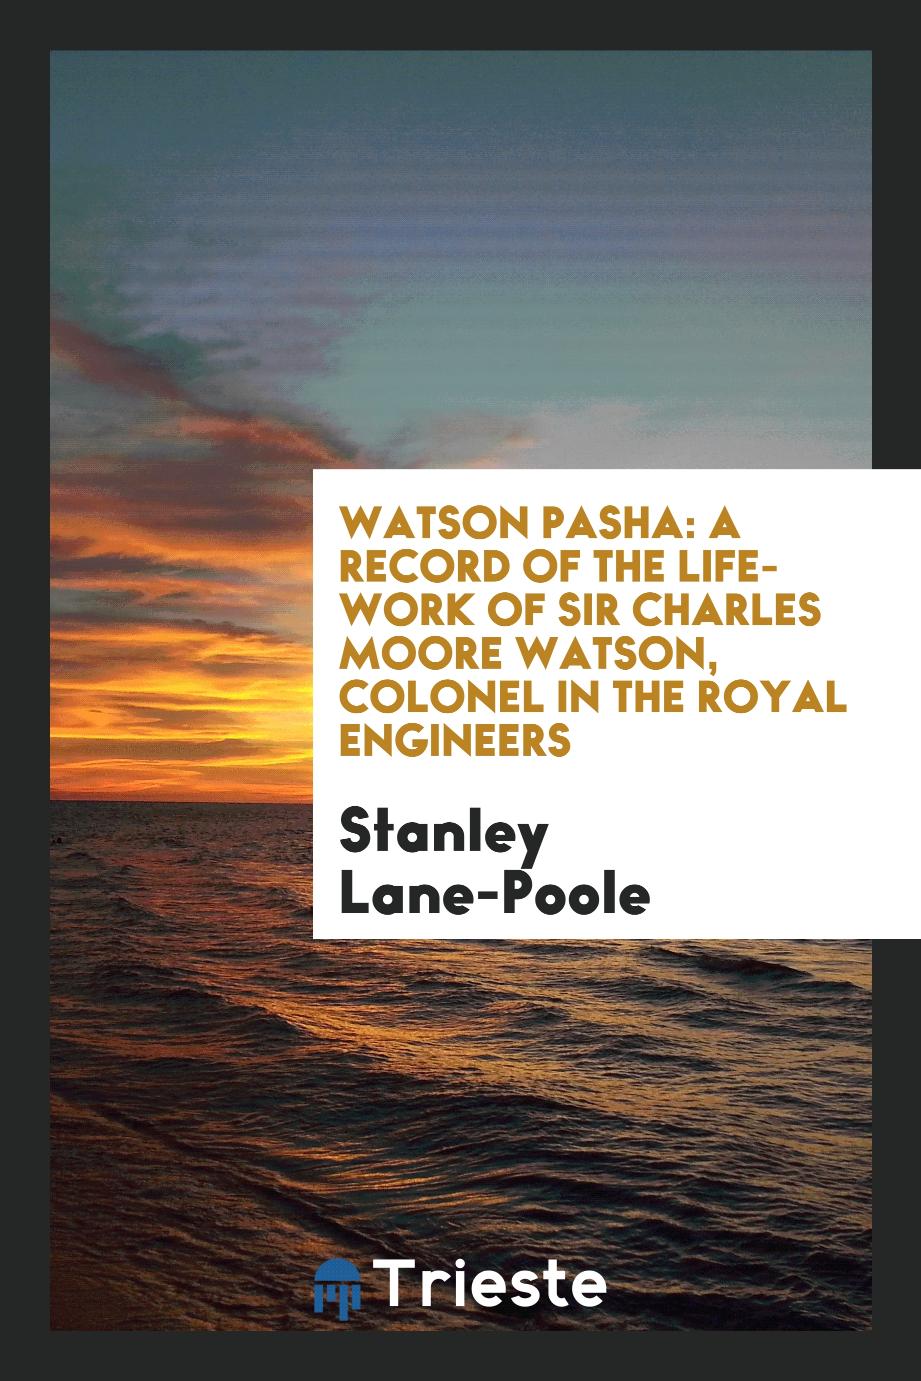 Watson Pasha: a record of the life-work of Sir Charles Moore Watson, Colonel in the Royal Engineers